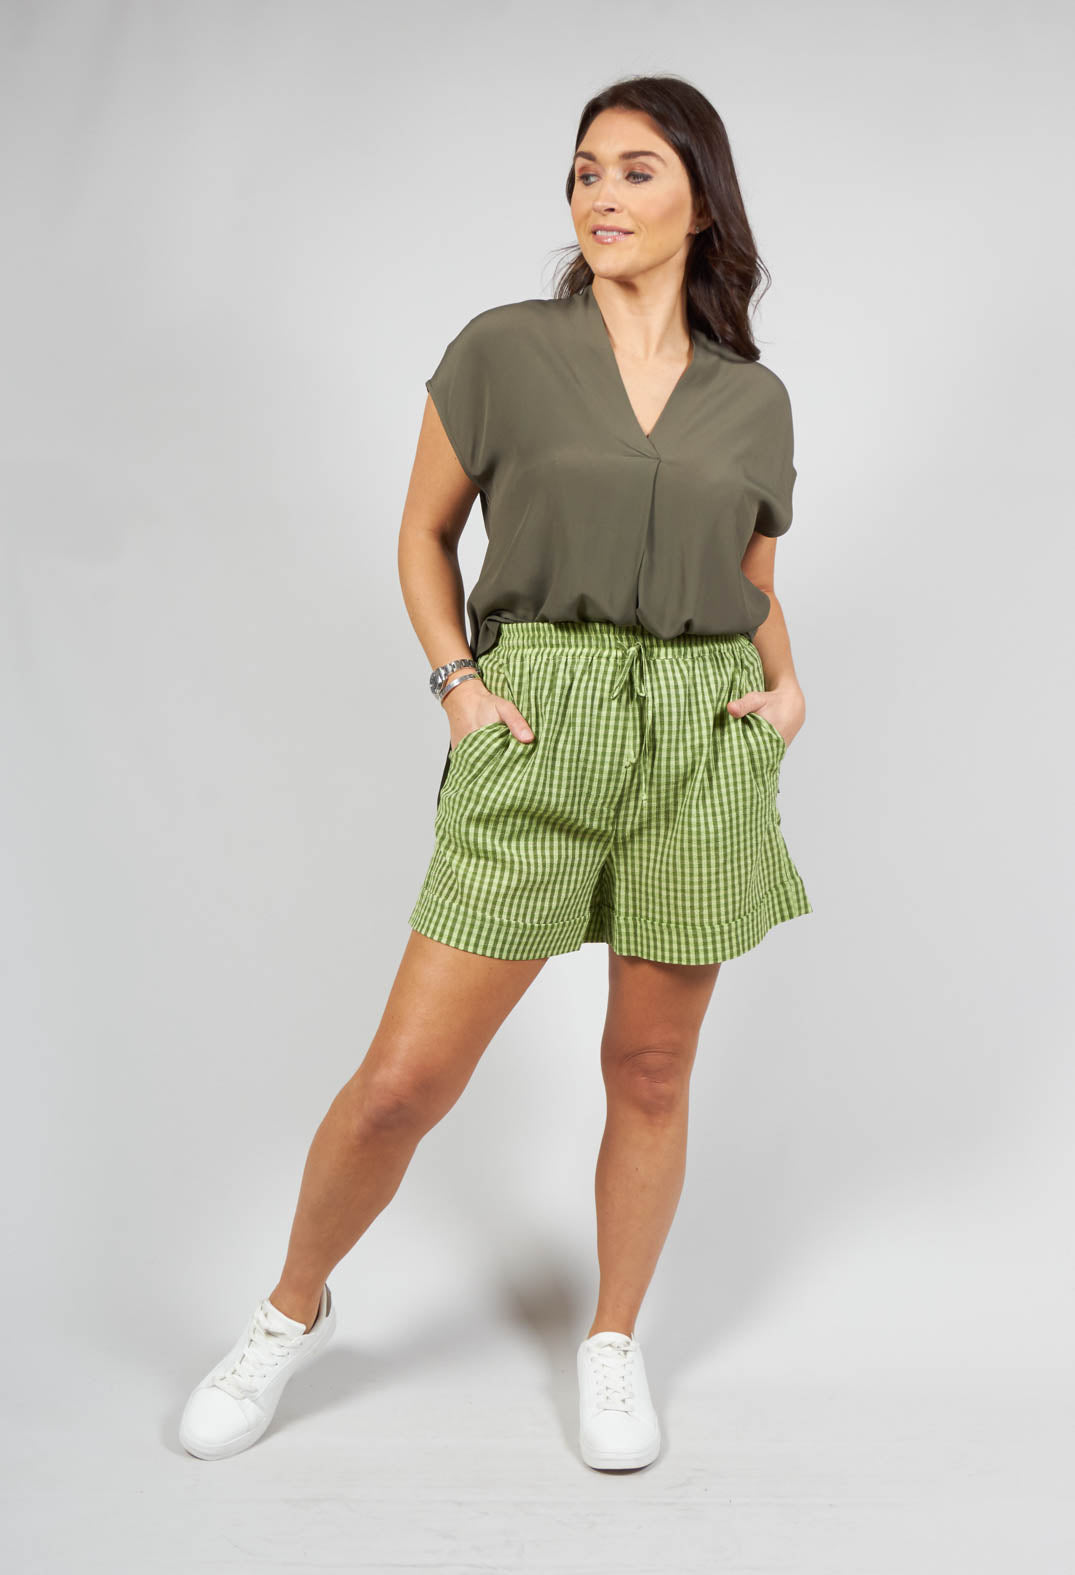 lady wearing turn up shorts in green check